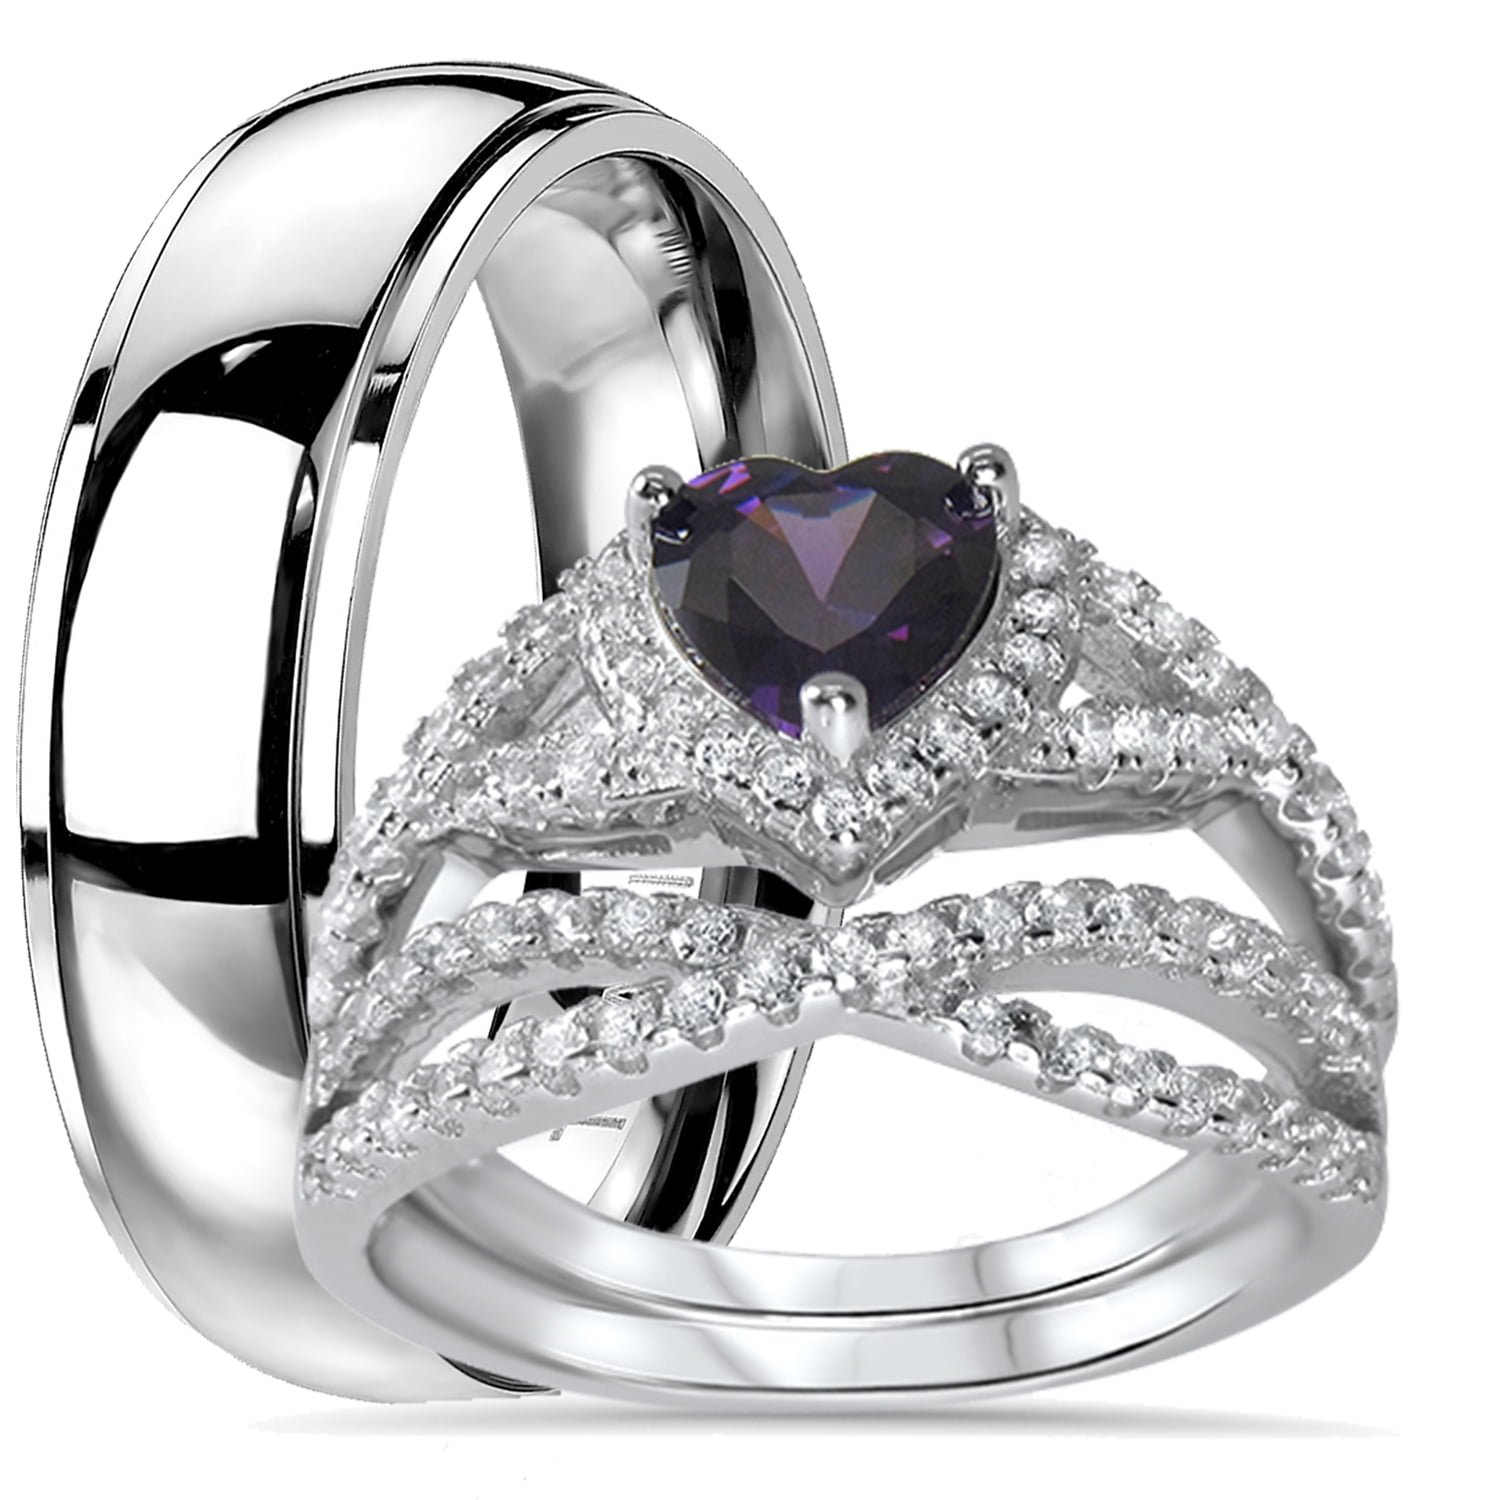 AWESOME 1.5 CT GENUINE AFRICAN AMETHYST 925 STERLING SILVER RING SIZE 5-10